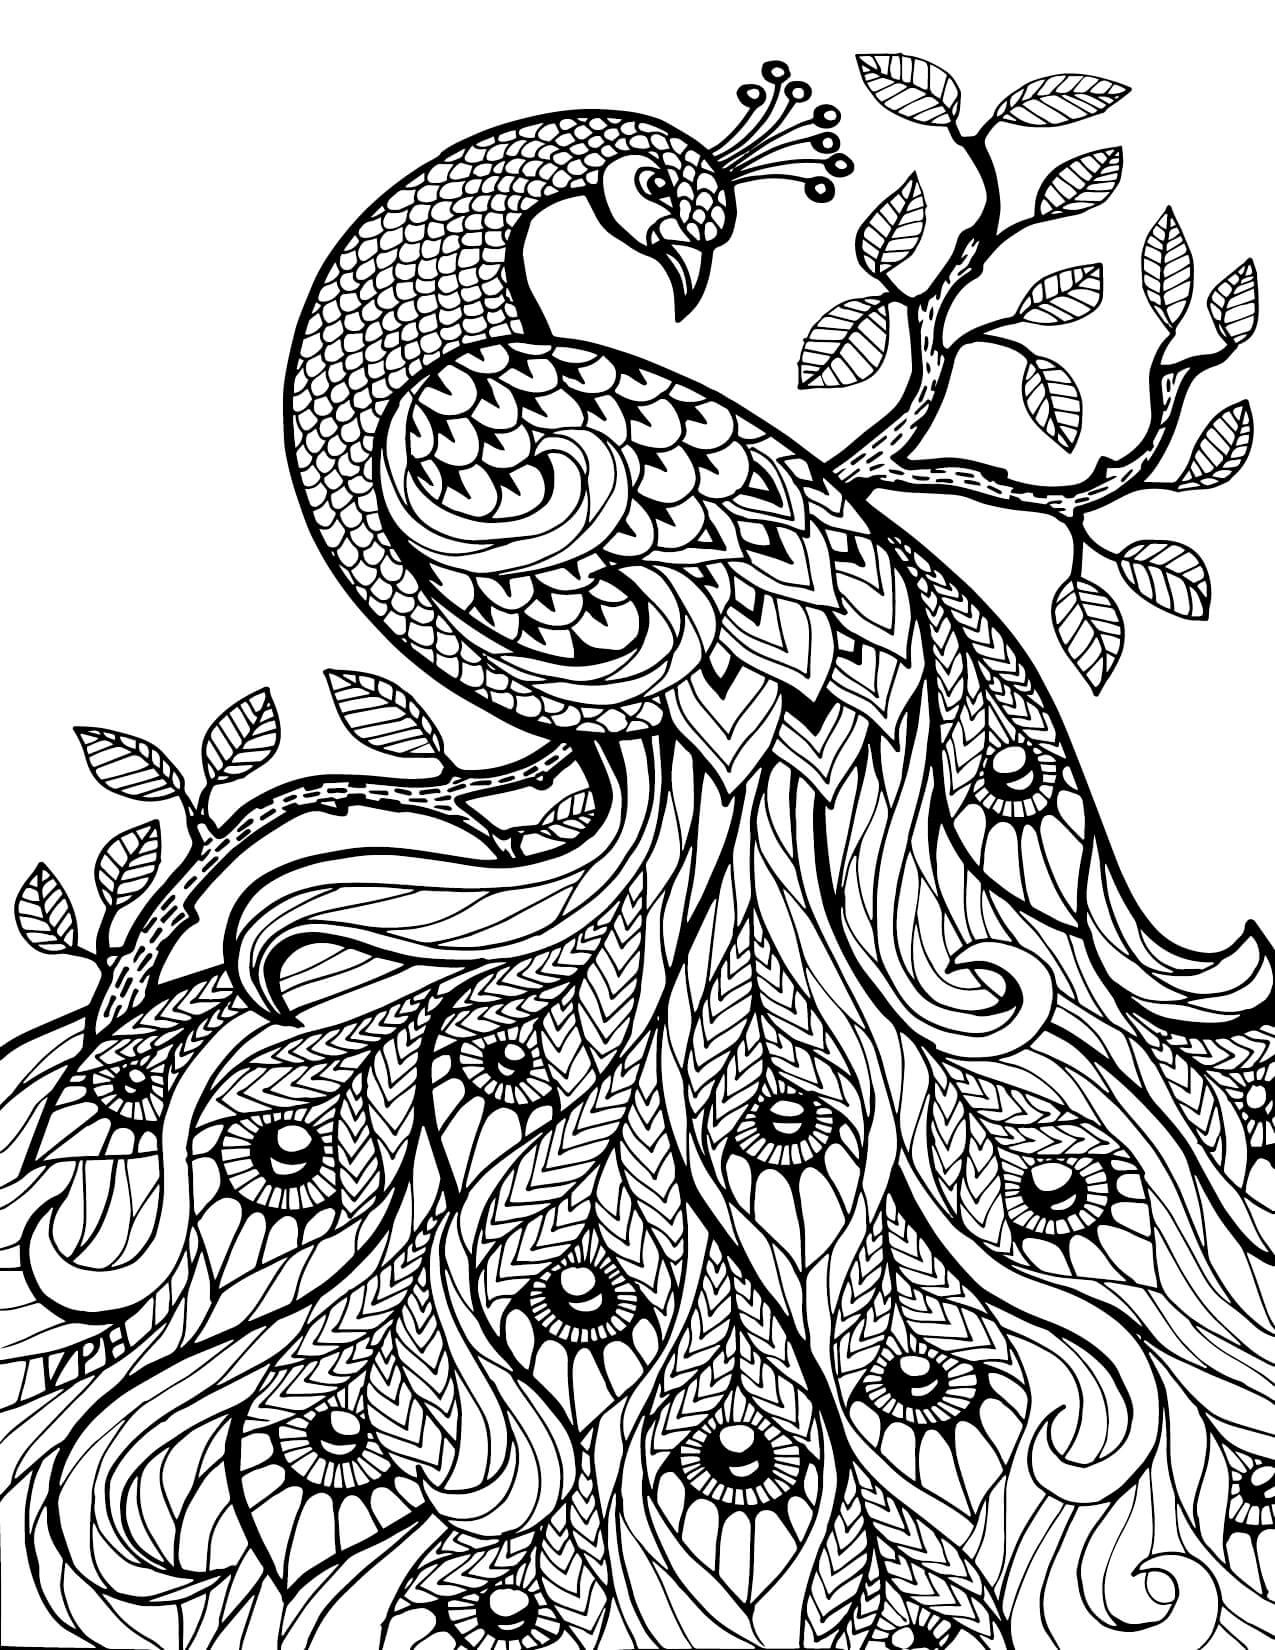 Hard Coloring Pages For Kids
 Coloring Pages For Adults Difficult Animals 57